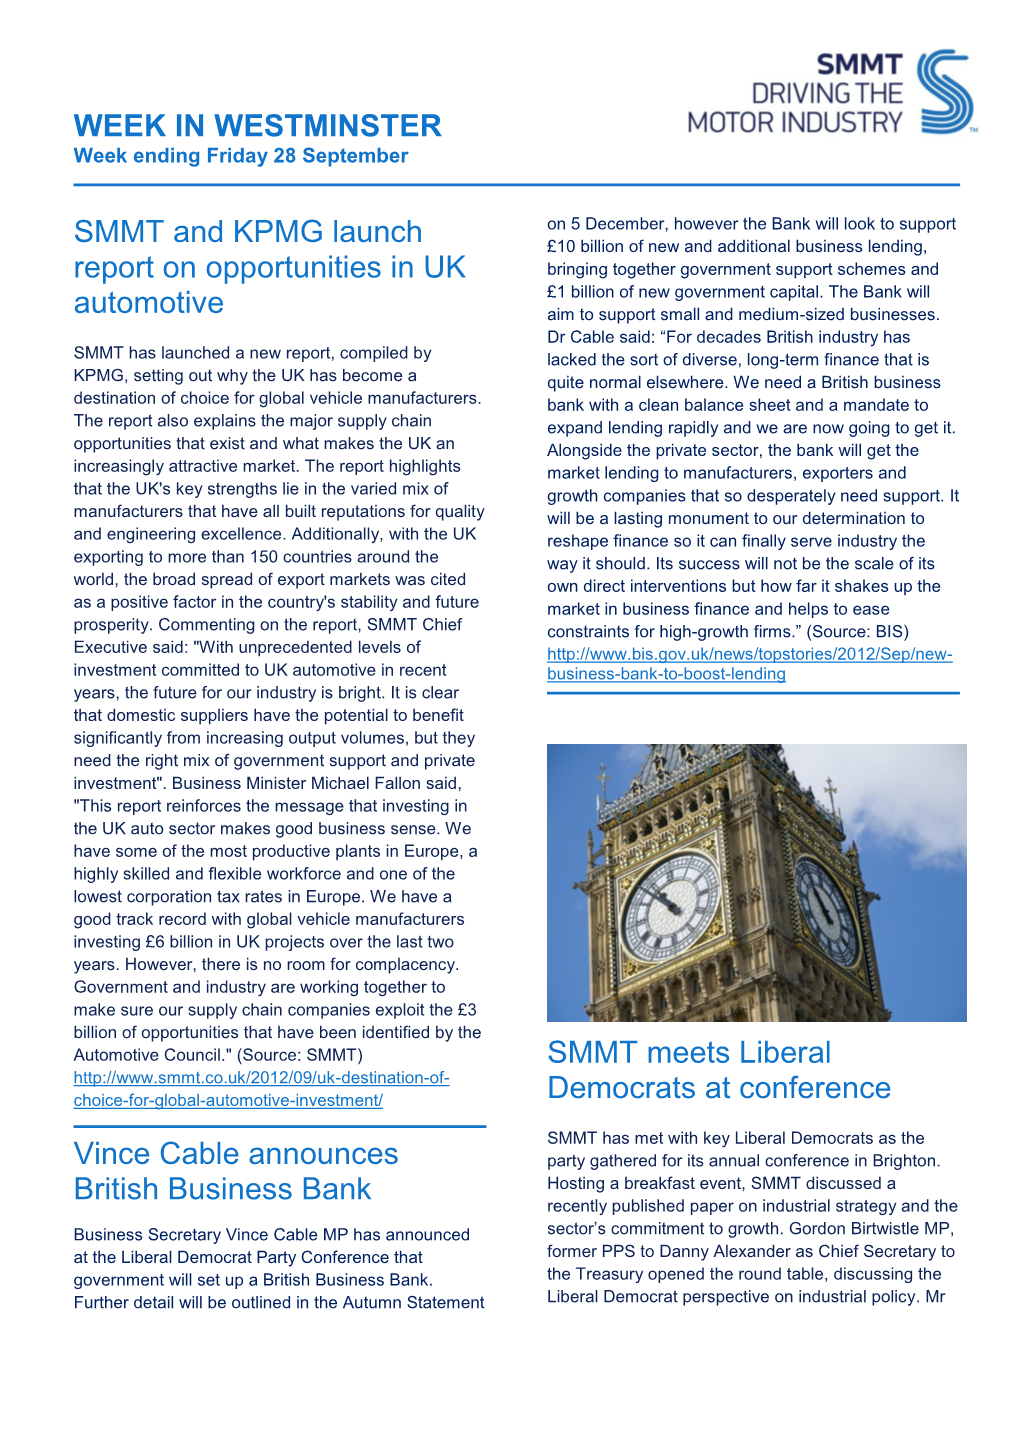 WEEK in WESTMINSTER SMMT and KPMG Launch Report On